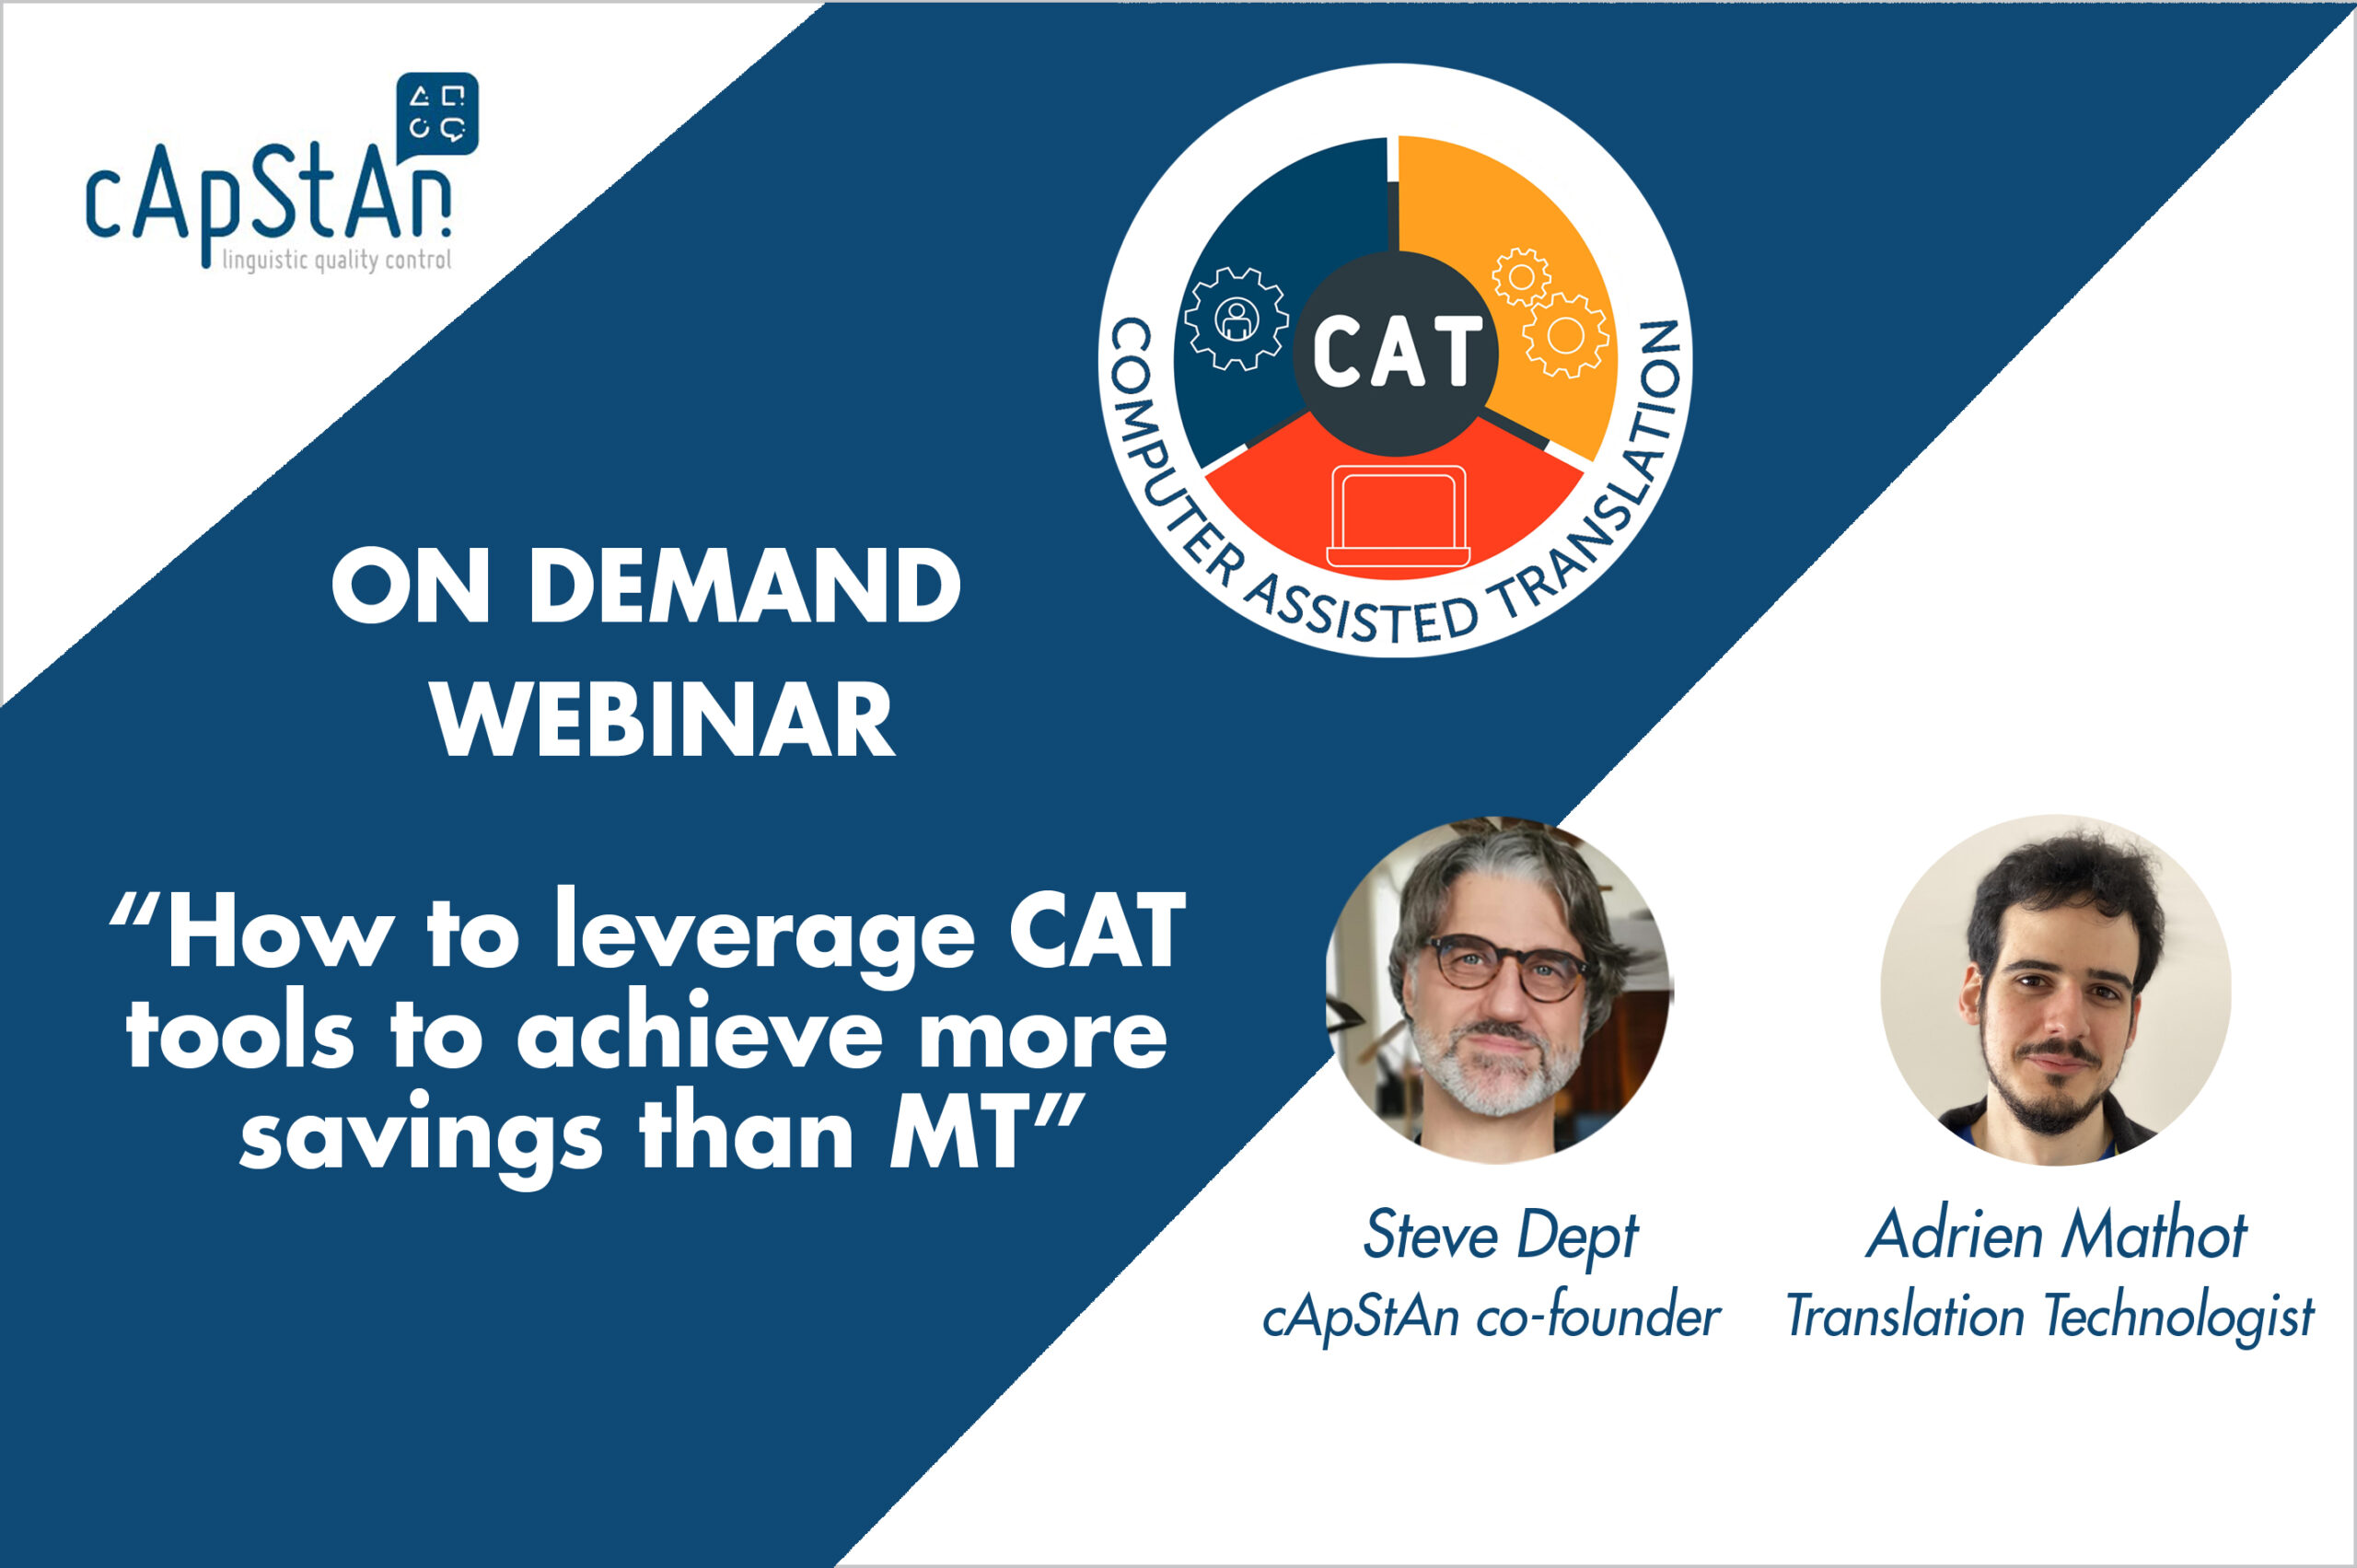 How to leverage CAT tools and achieve more savings than Machine Translation